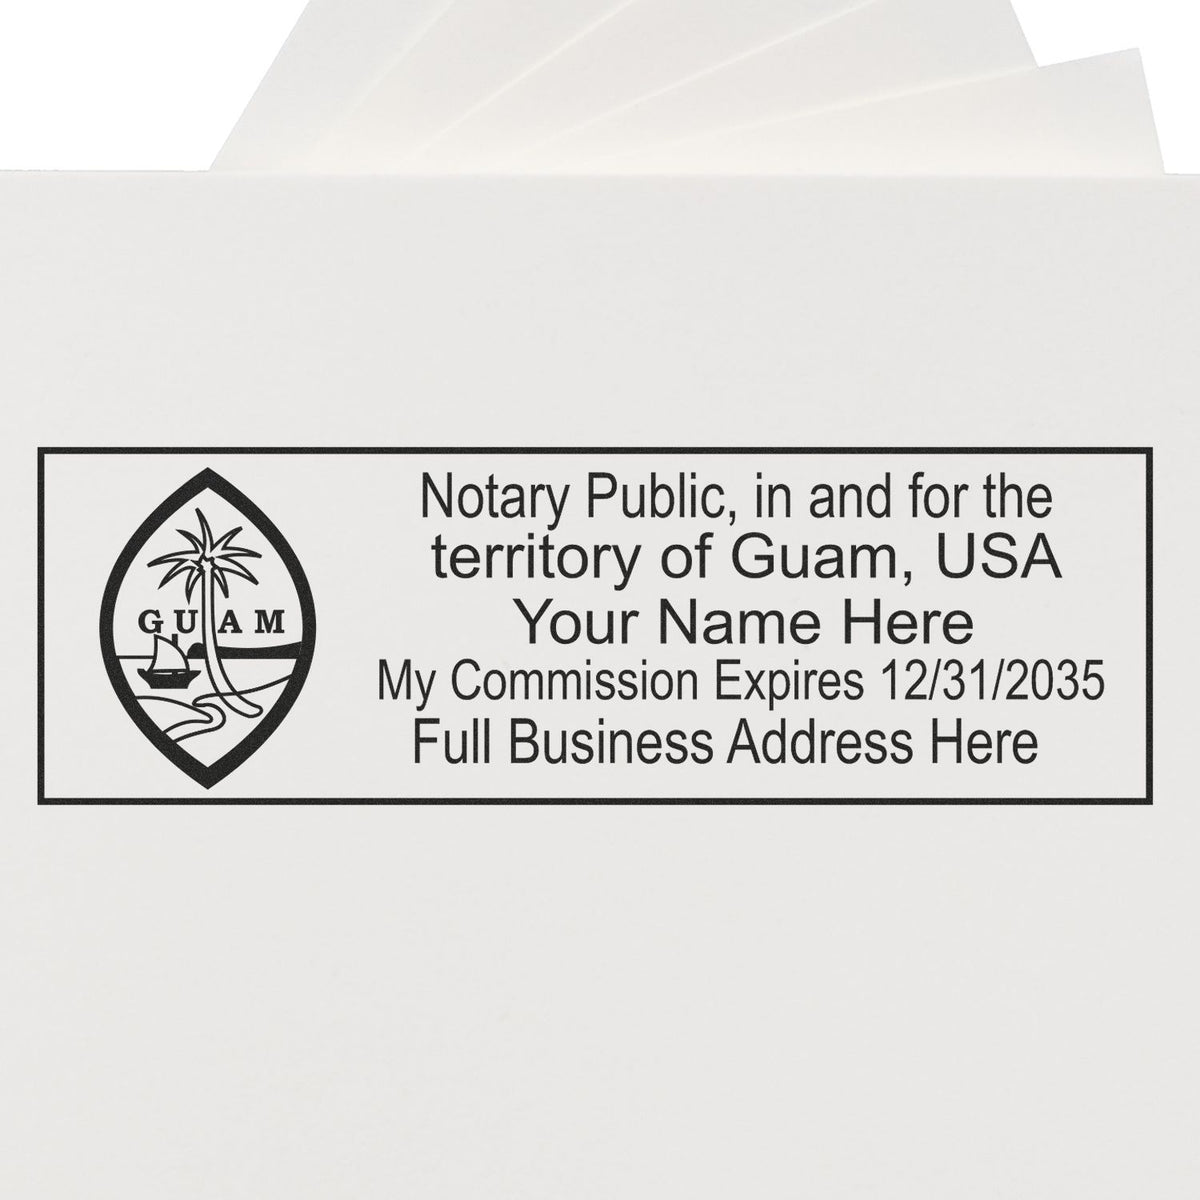 A stamped impression of the Self-Inking Rectangular Guam Notary Stamp in this stylish lifestyle photo, setting the tone for a unique and personalized product.